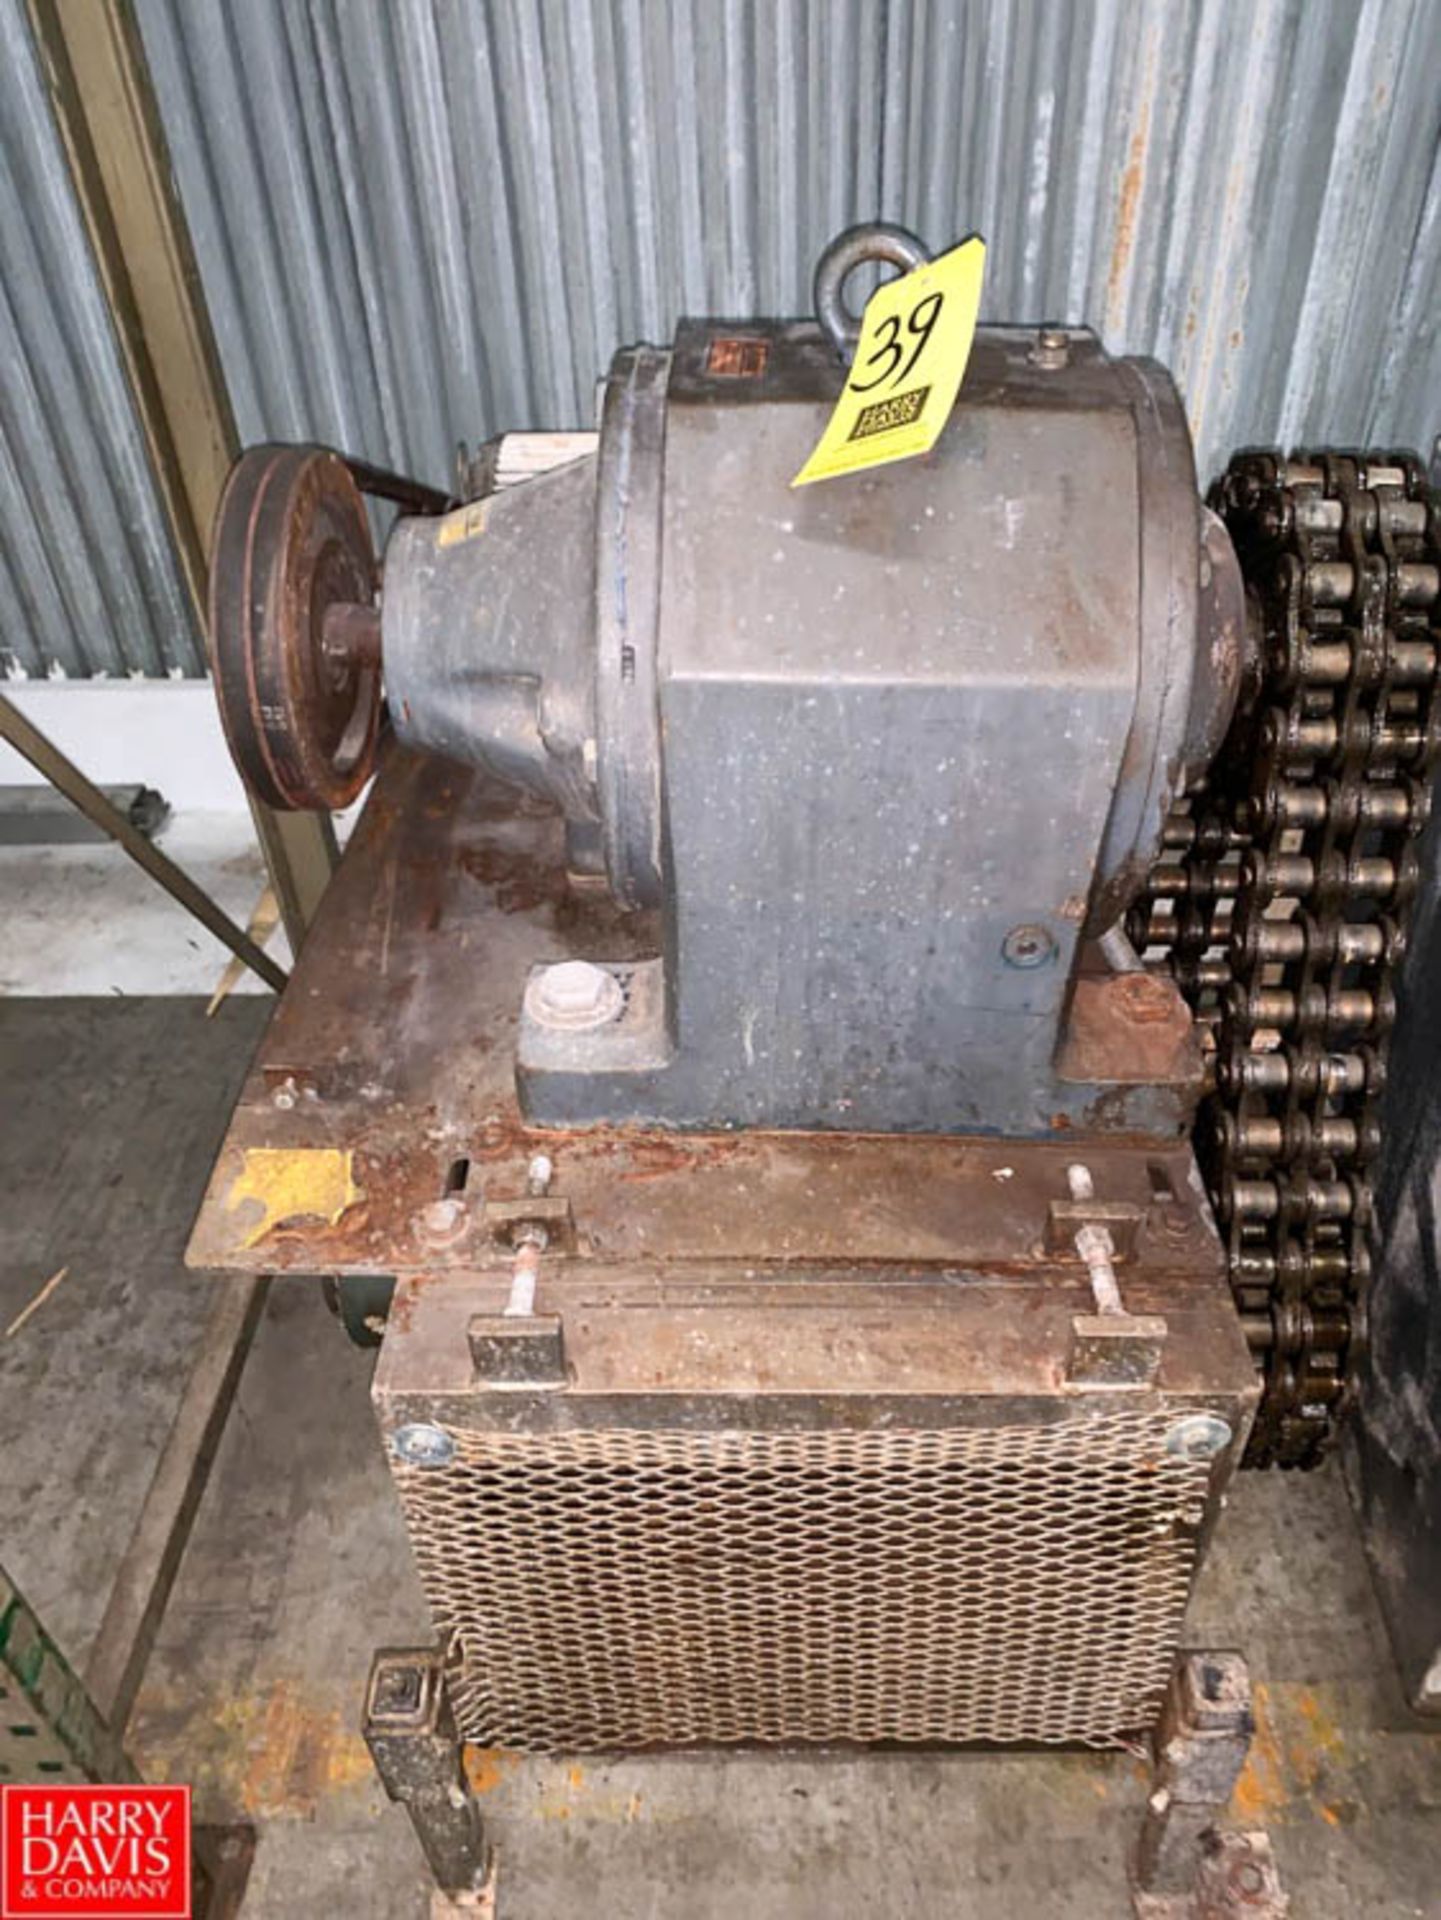 Cannon 10 HP Above-Ground Case Conveyor Drive - Rigging: $50